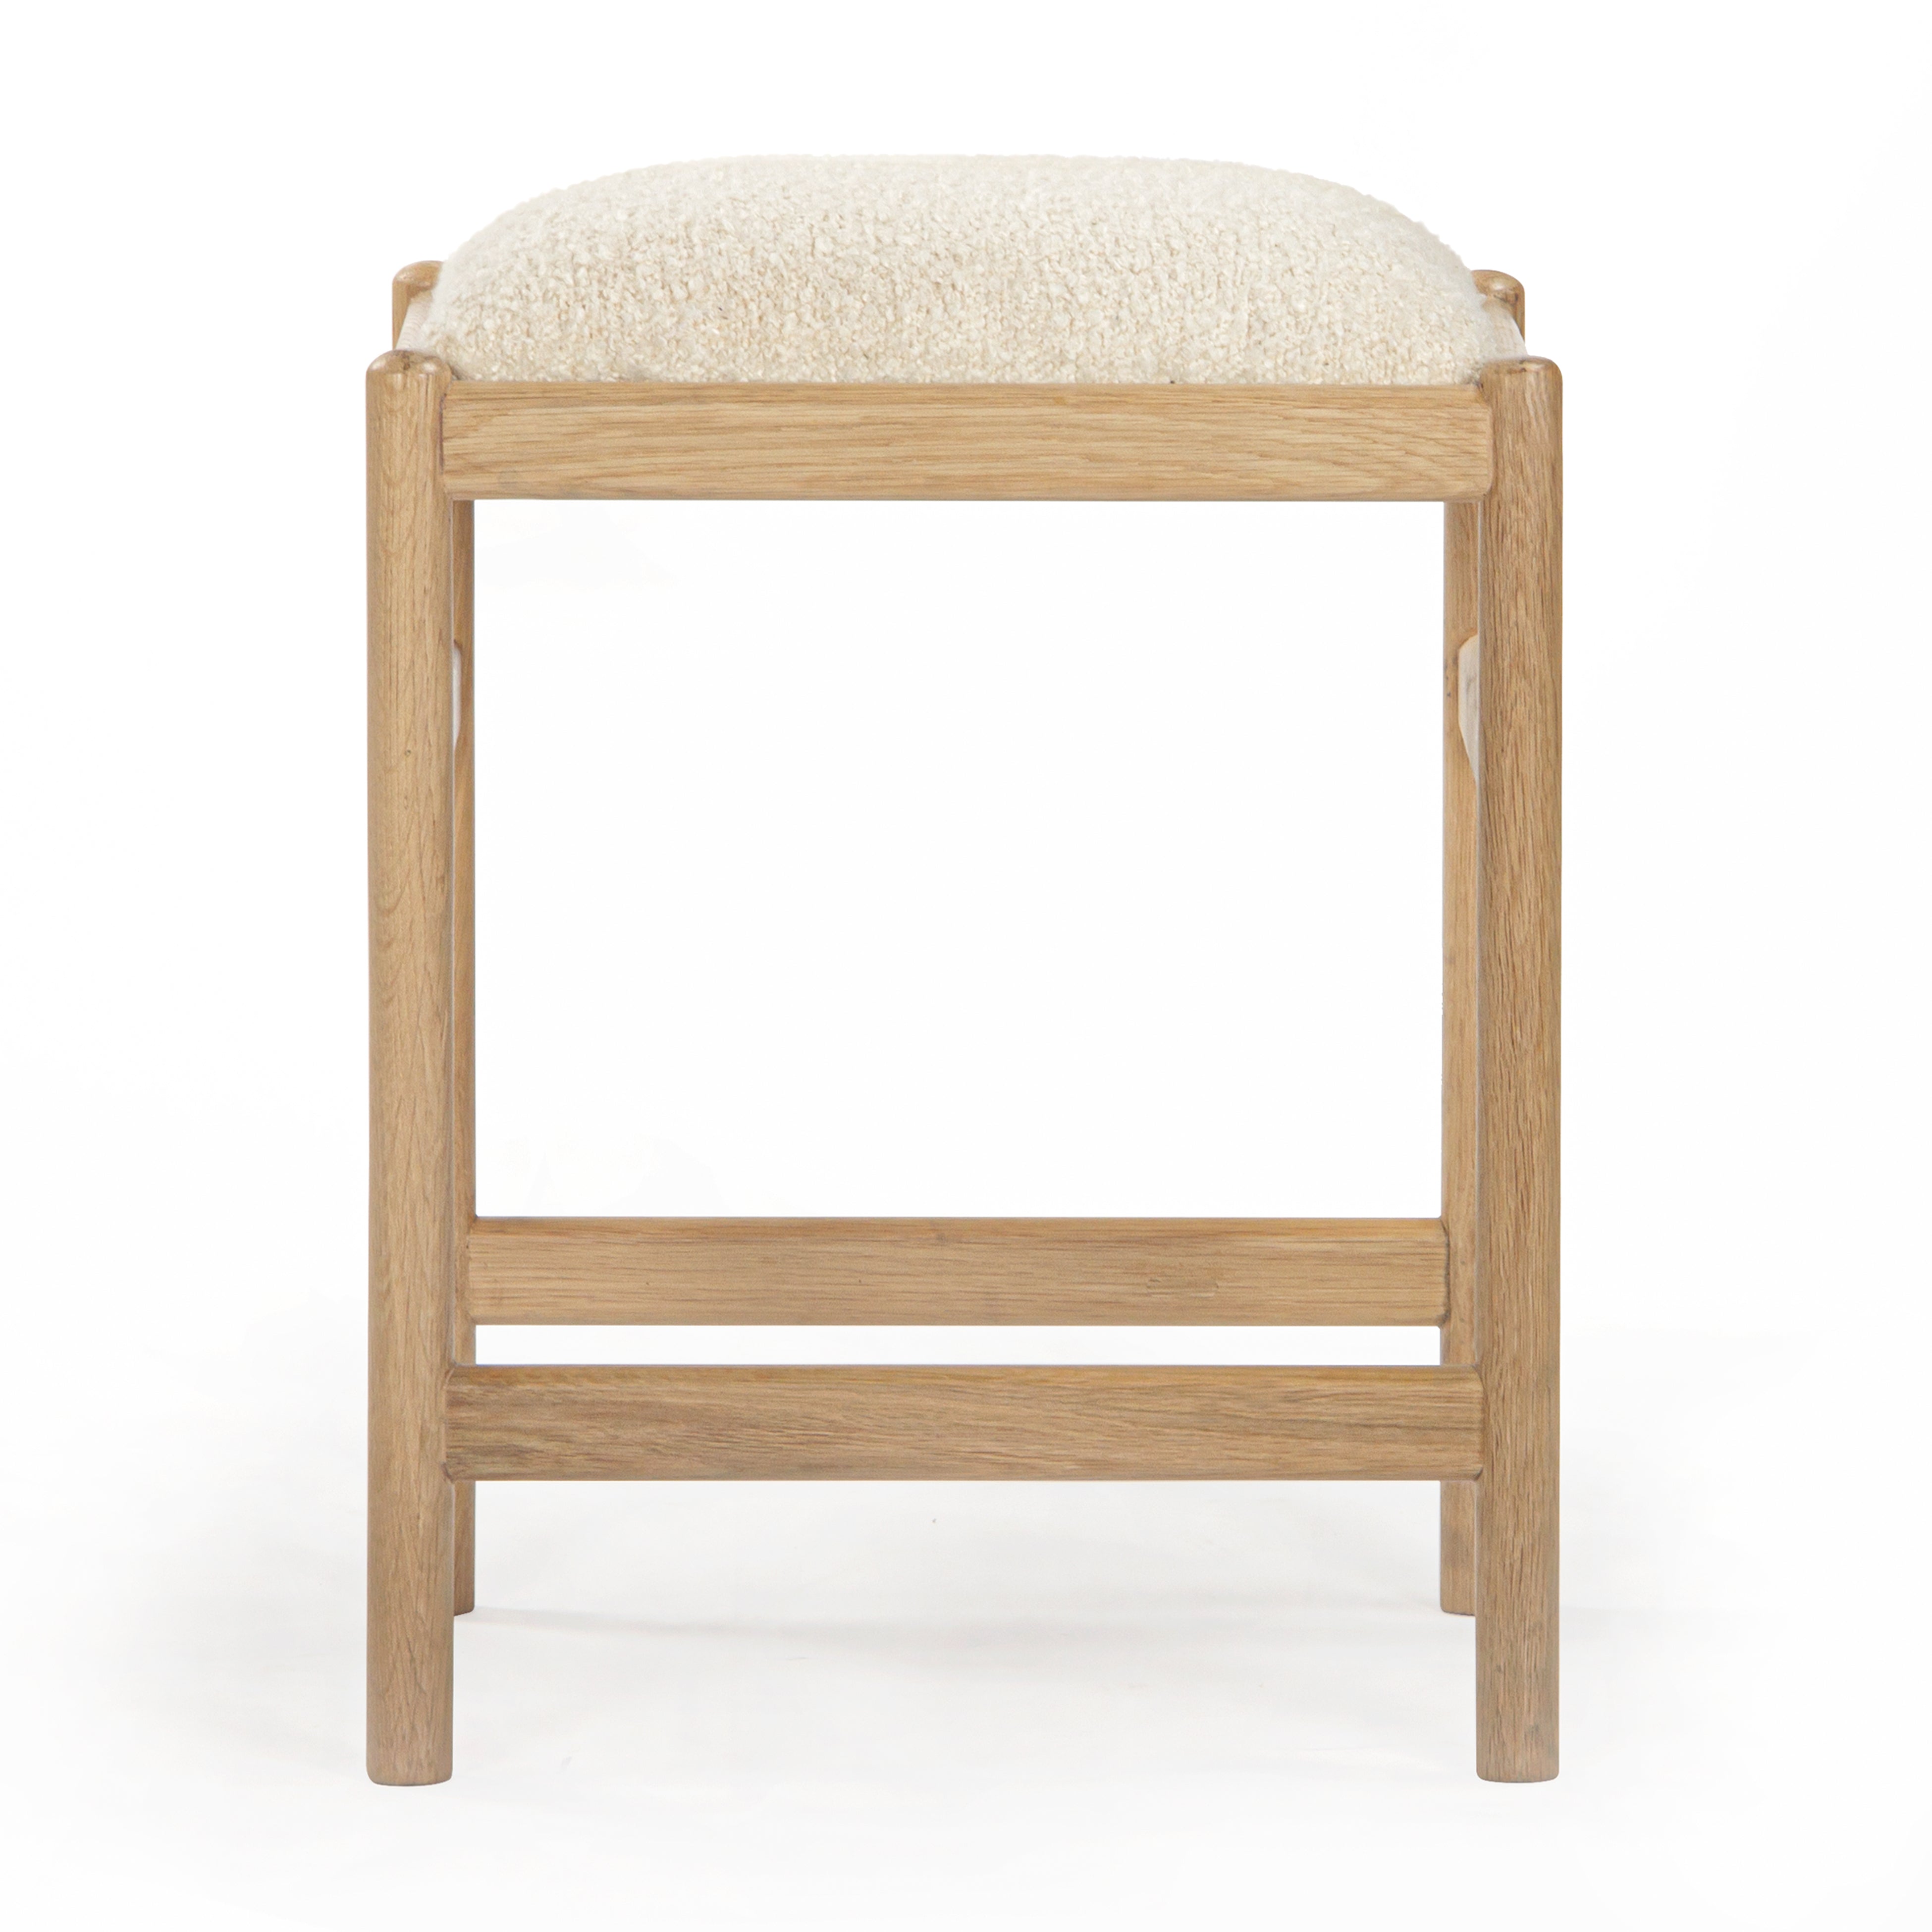 Union Home, Salome Counter Stool - Boucle